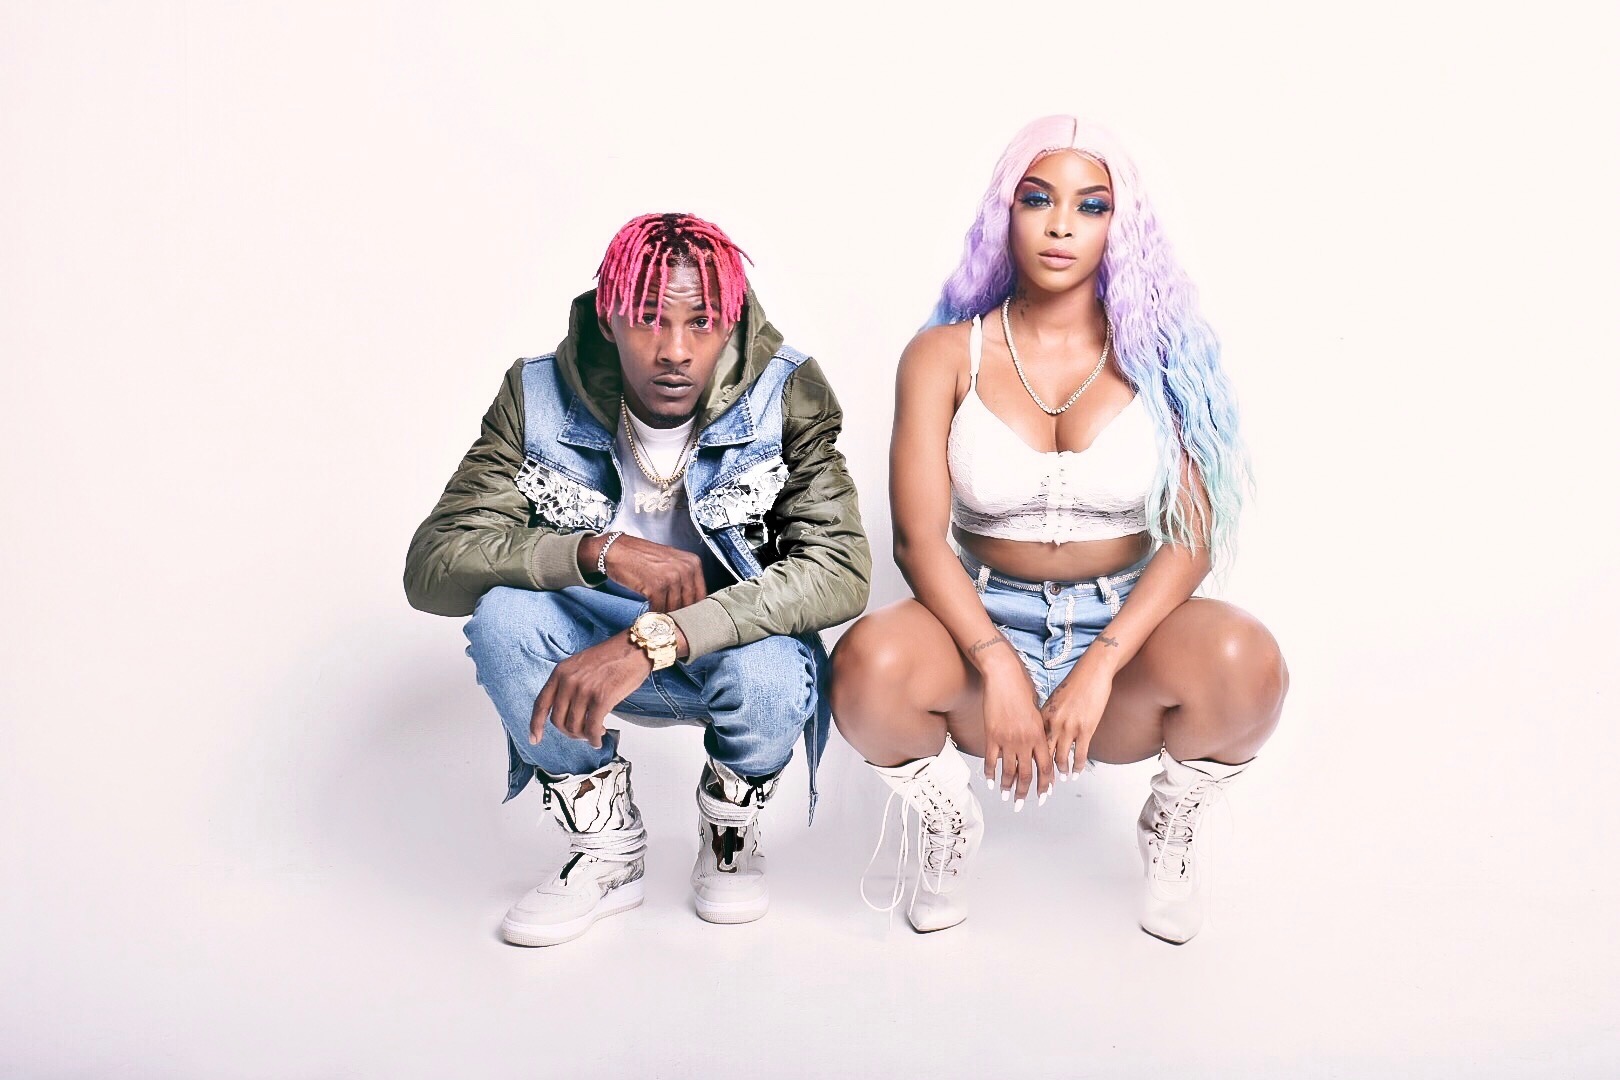 Prince Peezy & Lala Chanel release new visuals for their highly anticipated single “Die 4 Me”